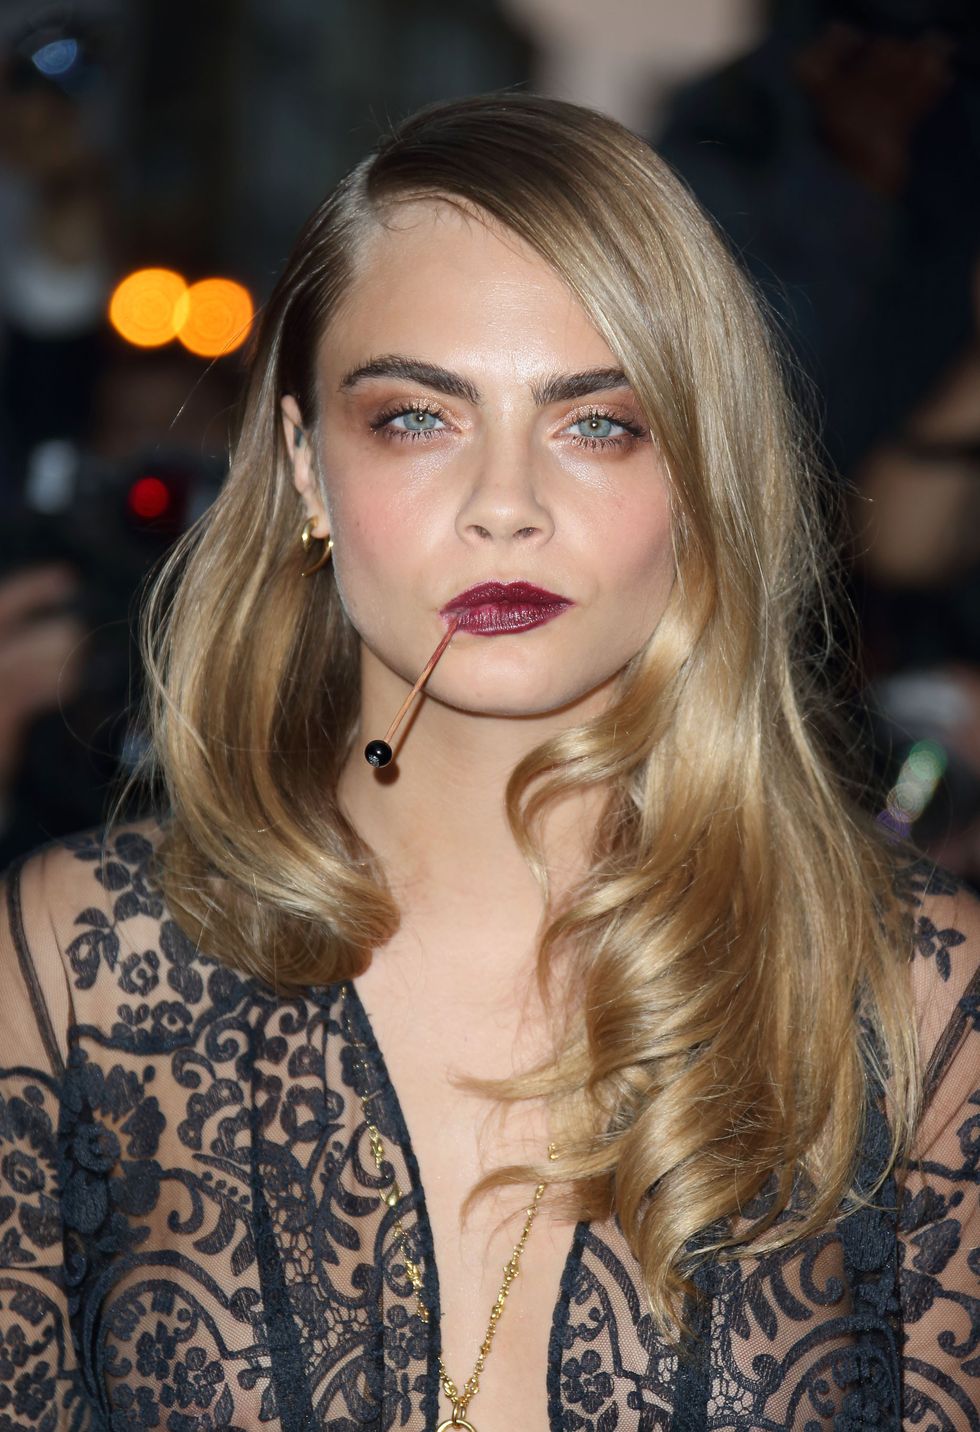 Cara Delevingne - The GQ Men of the Year Awards 2014 celebrity hair and makeup looks - beauty trends AW14 - Cosmopolitan.co.uk